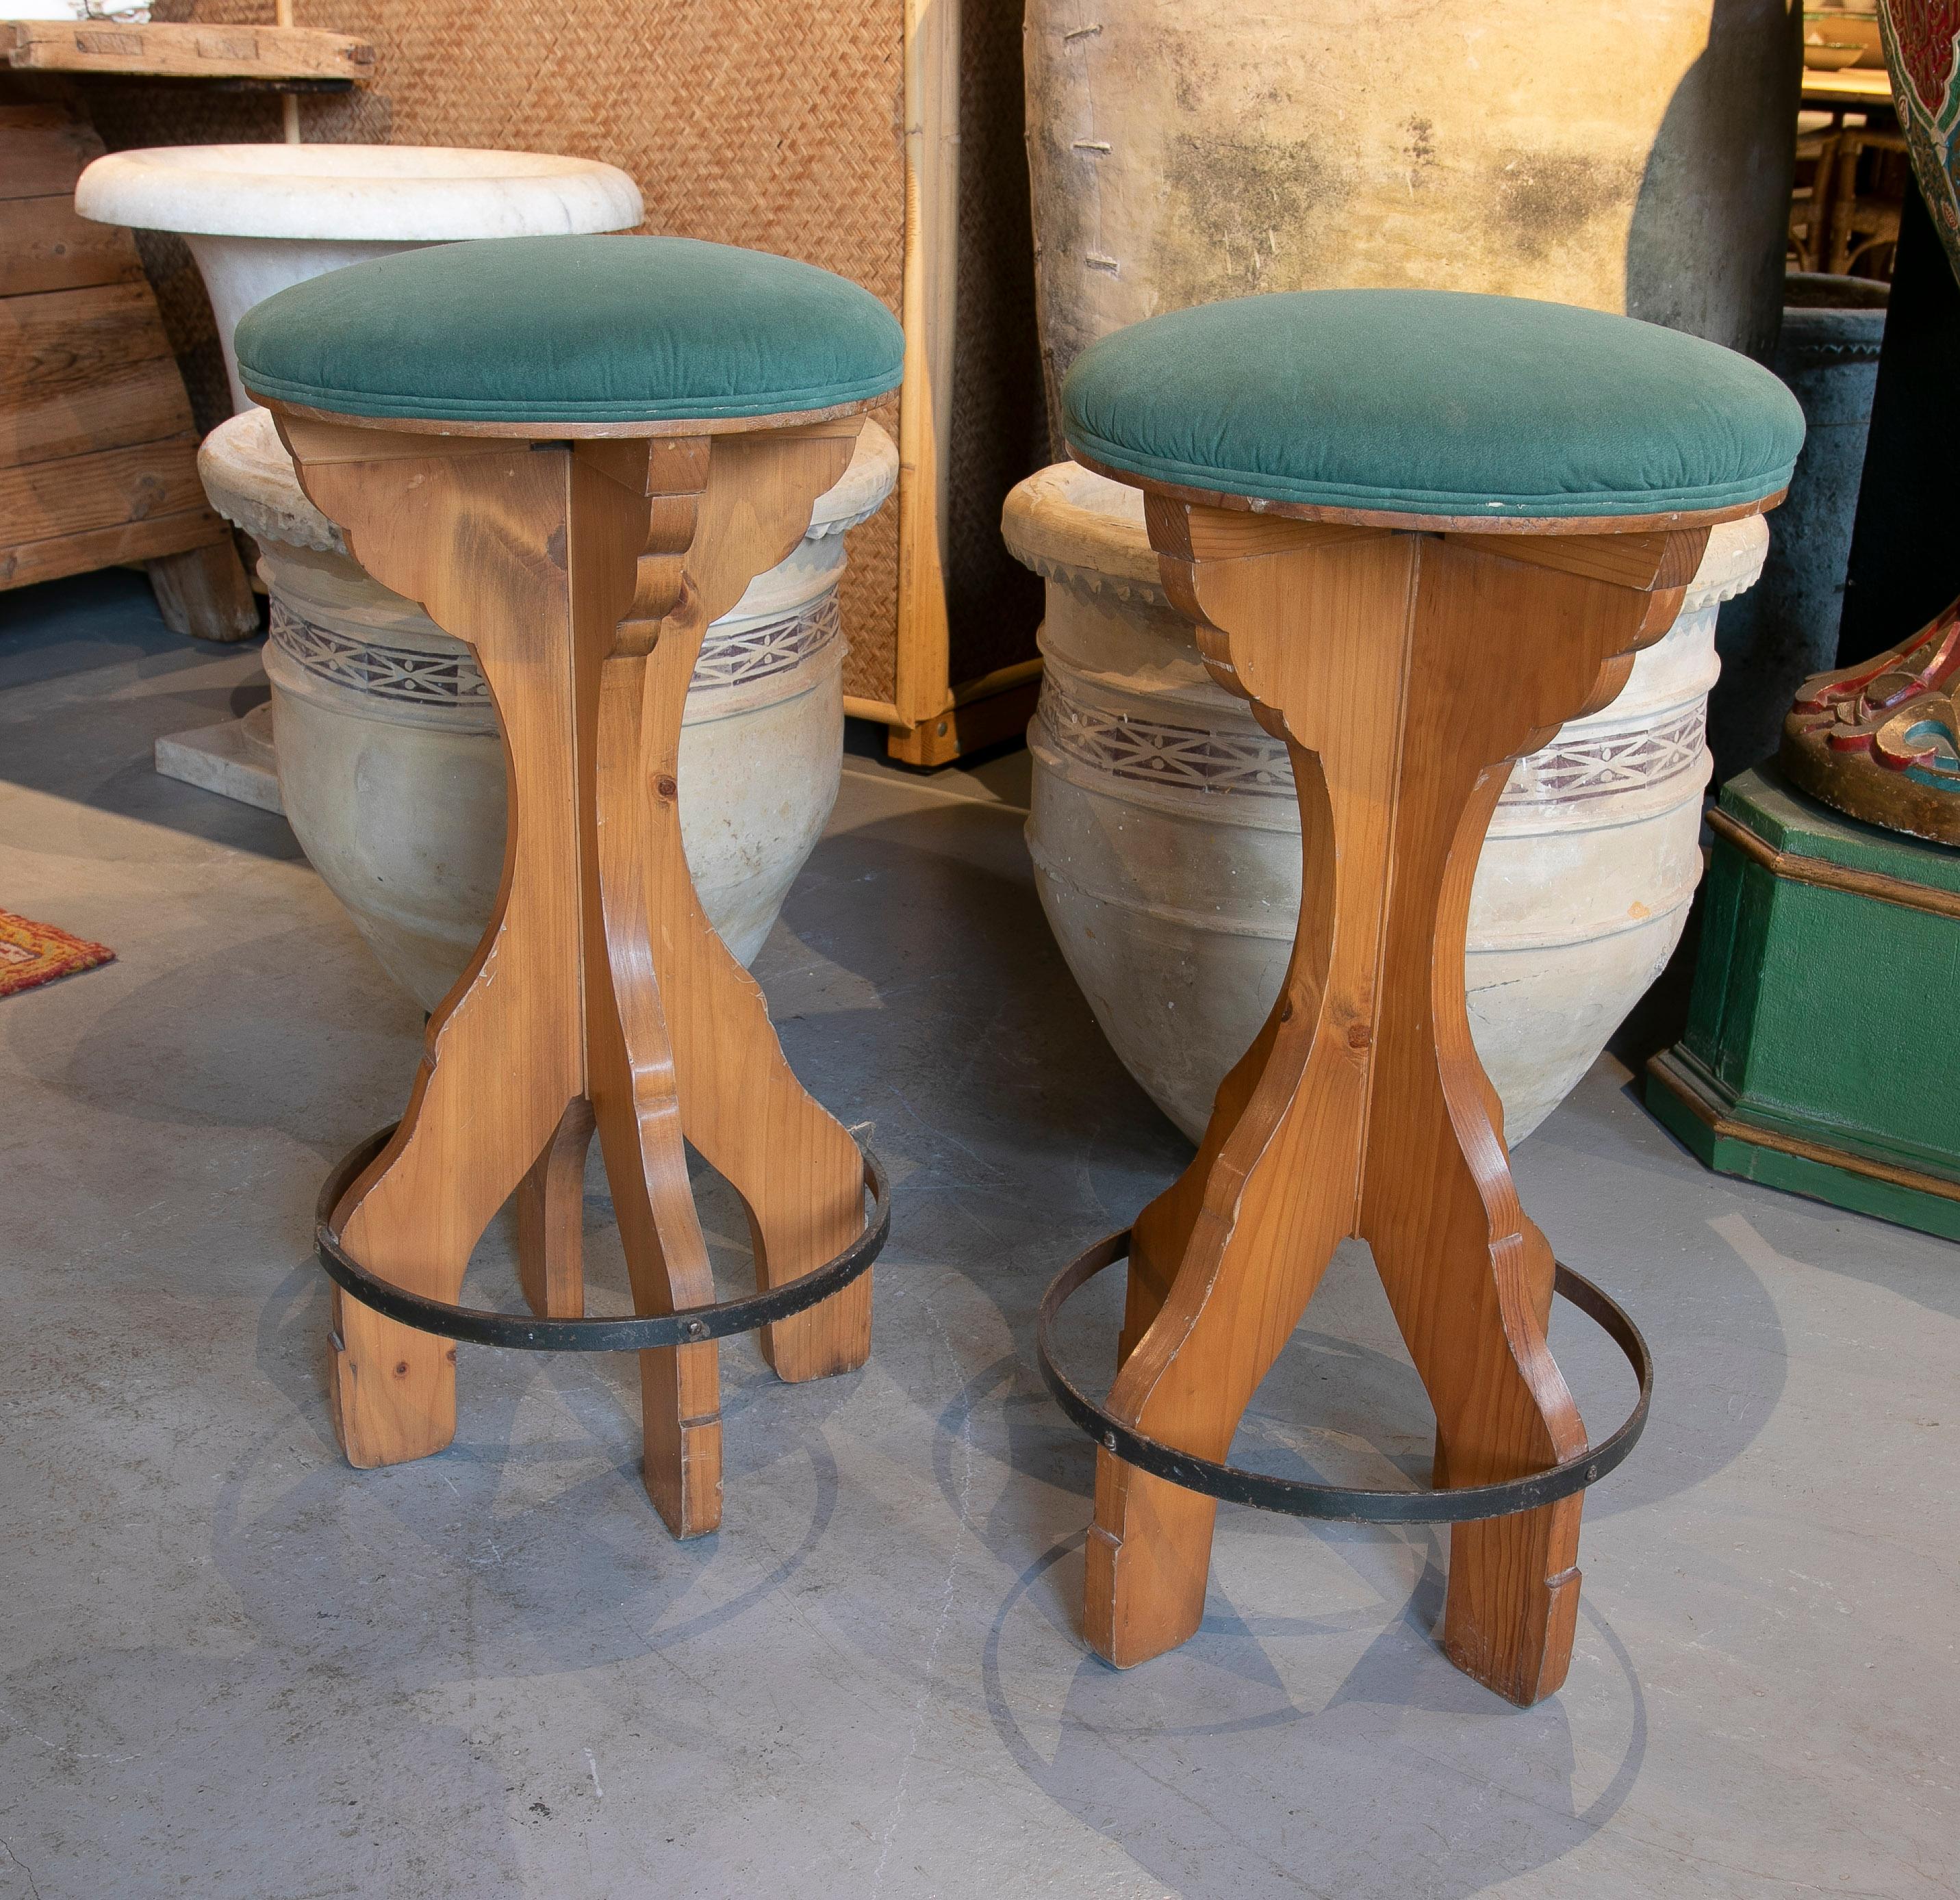 Pair of vintage 1980s Spanish wooden stools with teal upholstered seats.